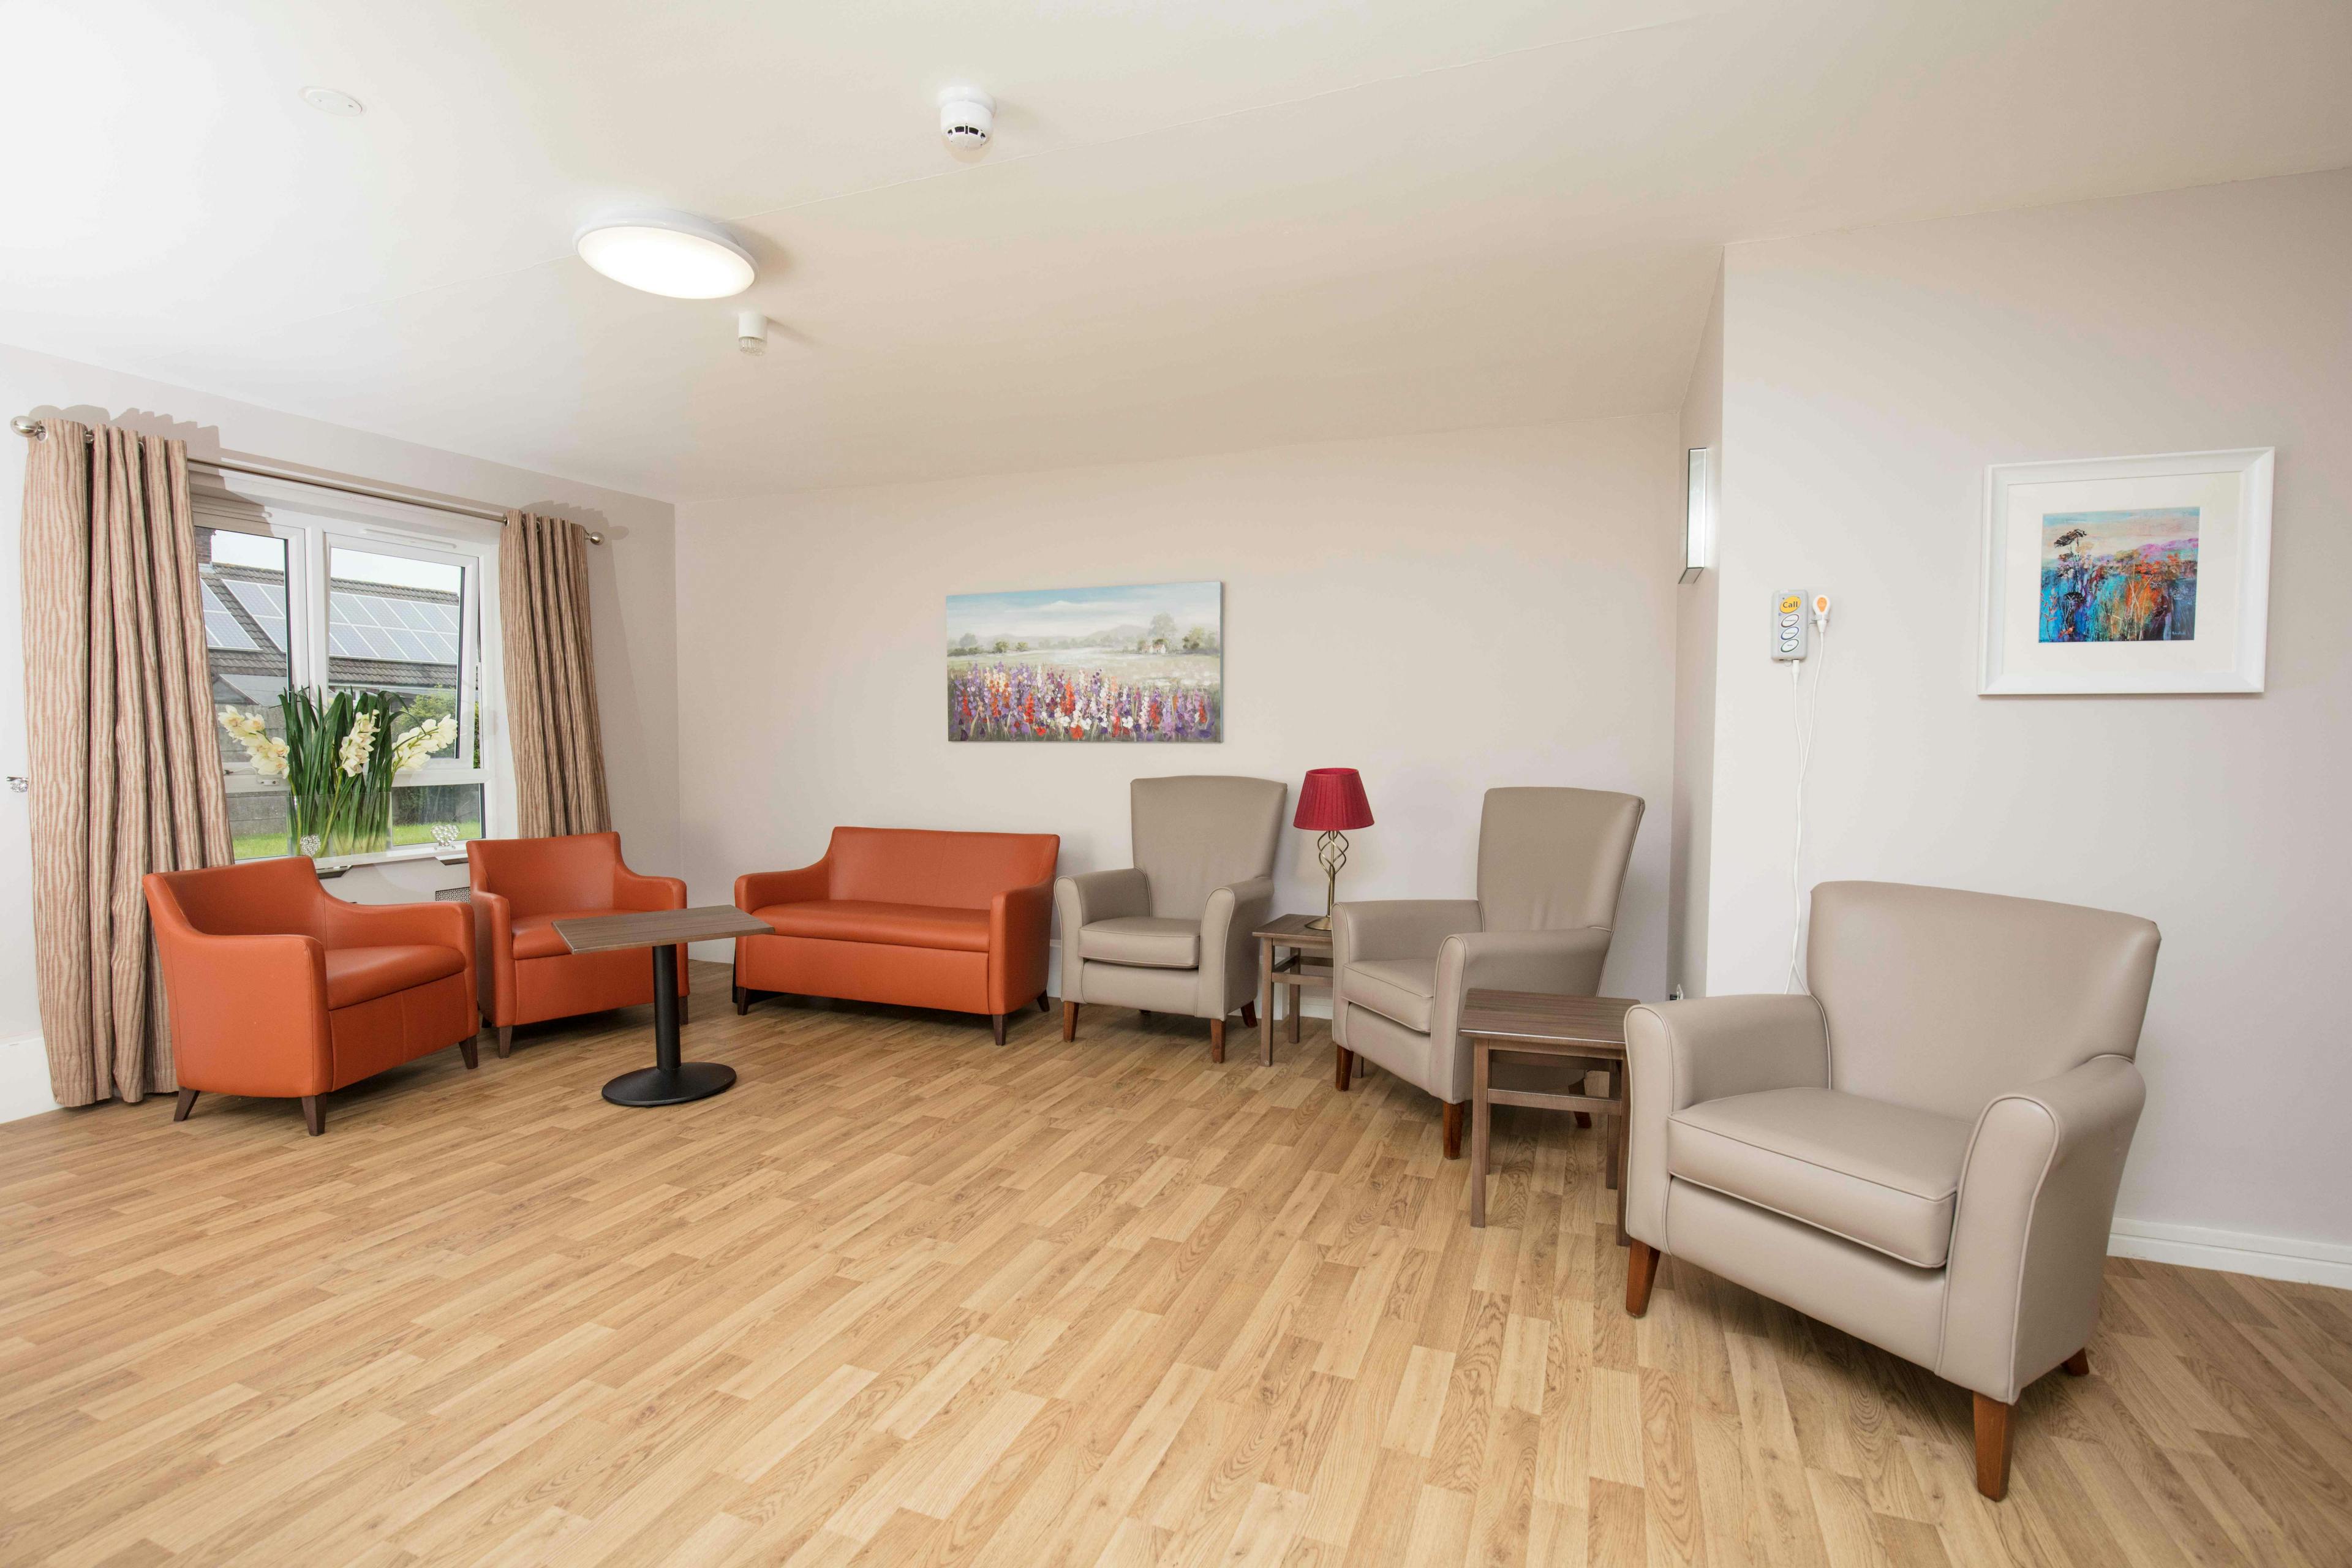 Garswood House care home